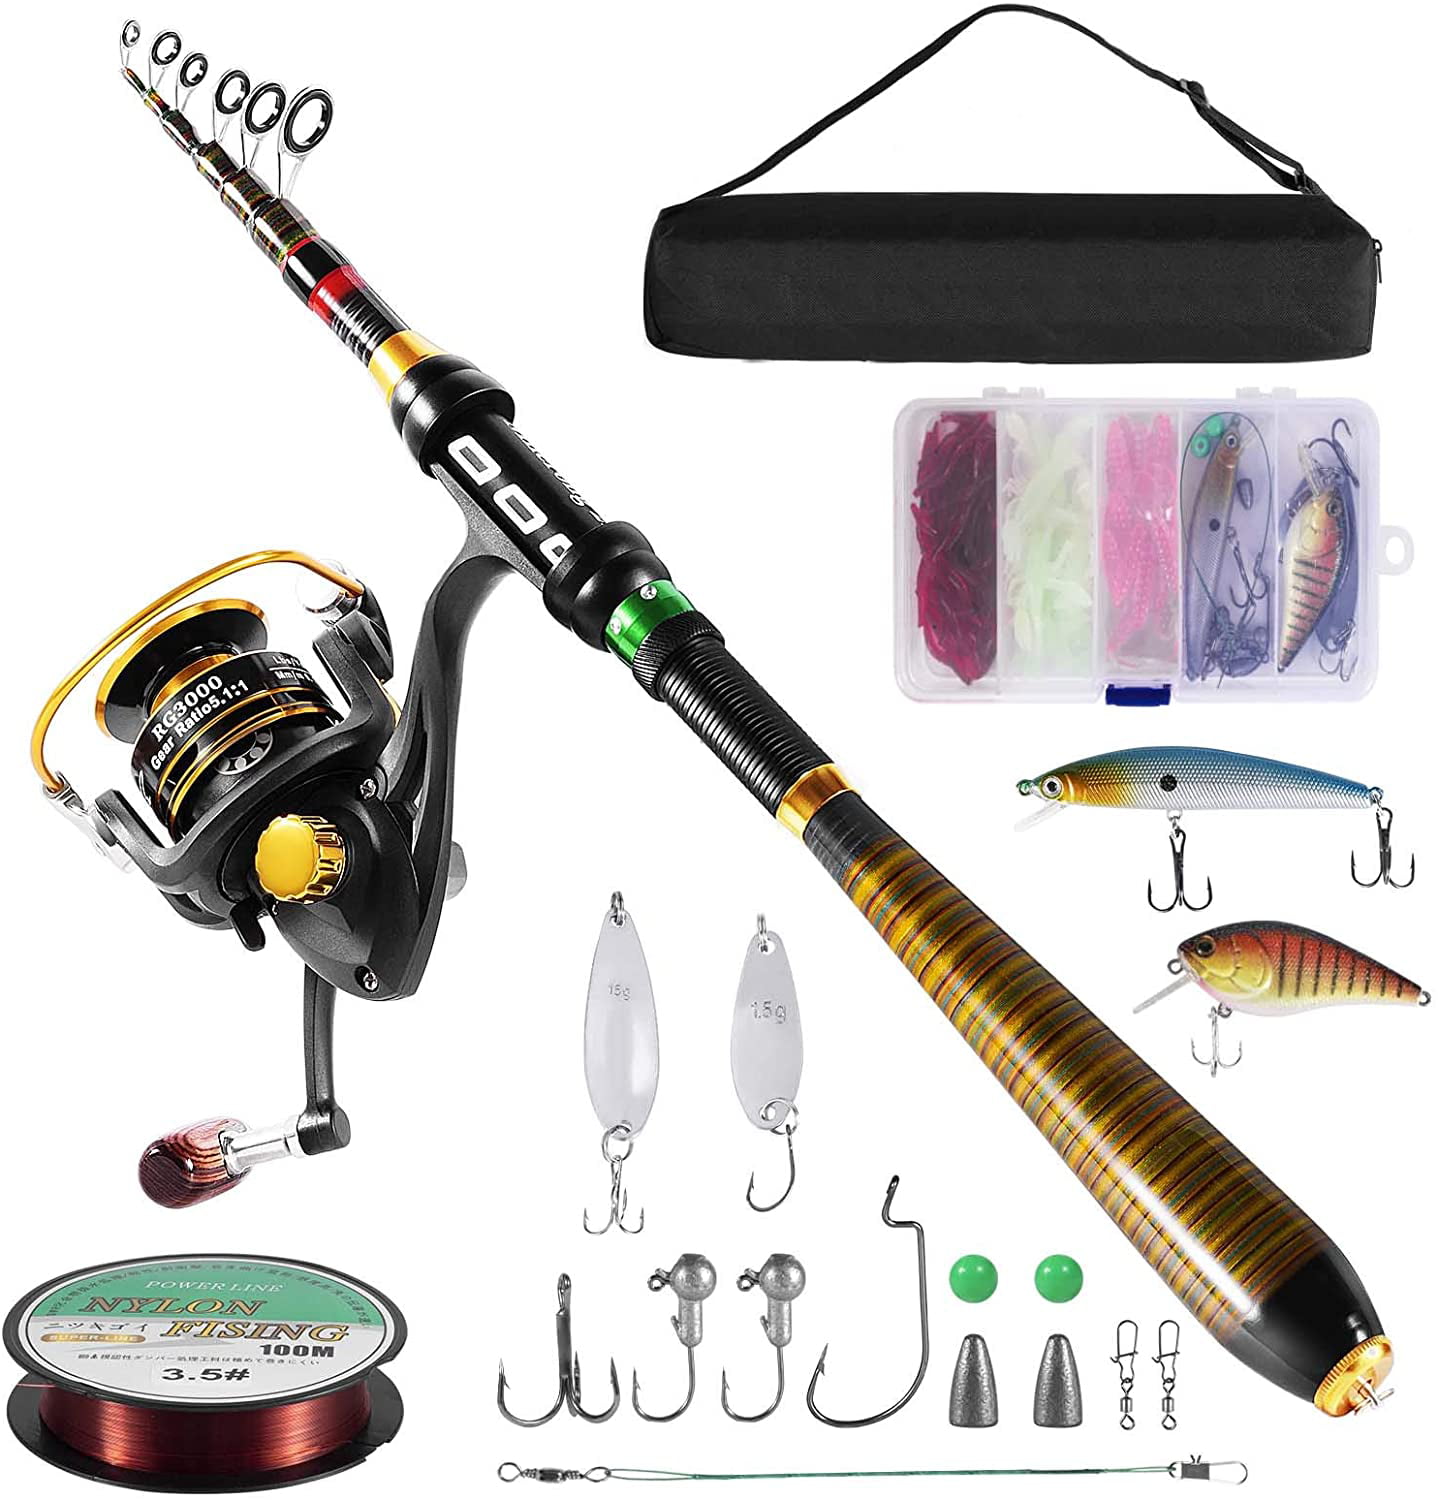 Lightweight Telescopic Fishing Rod and Spinning Reel Combos 